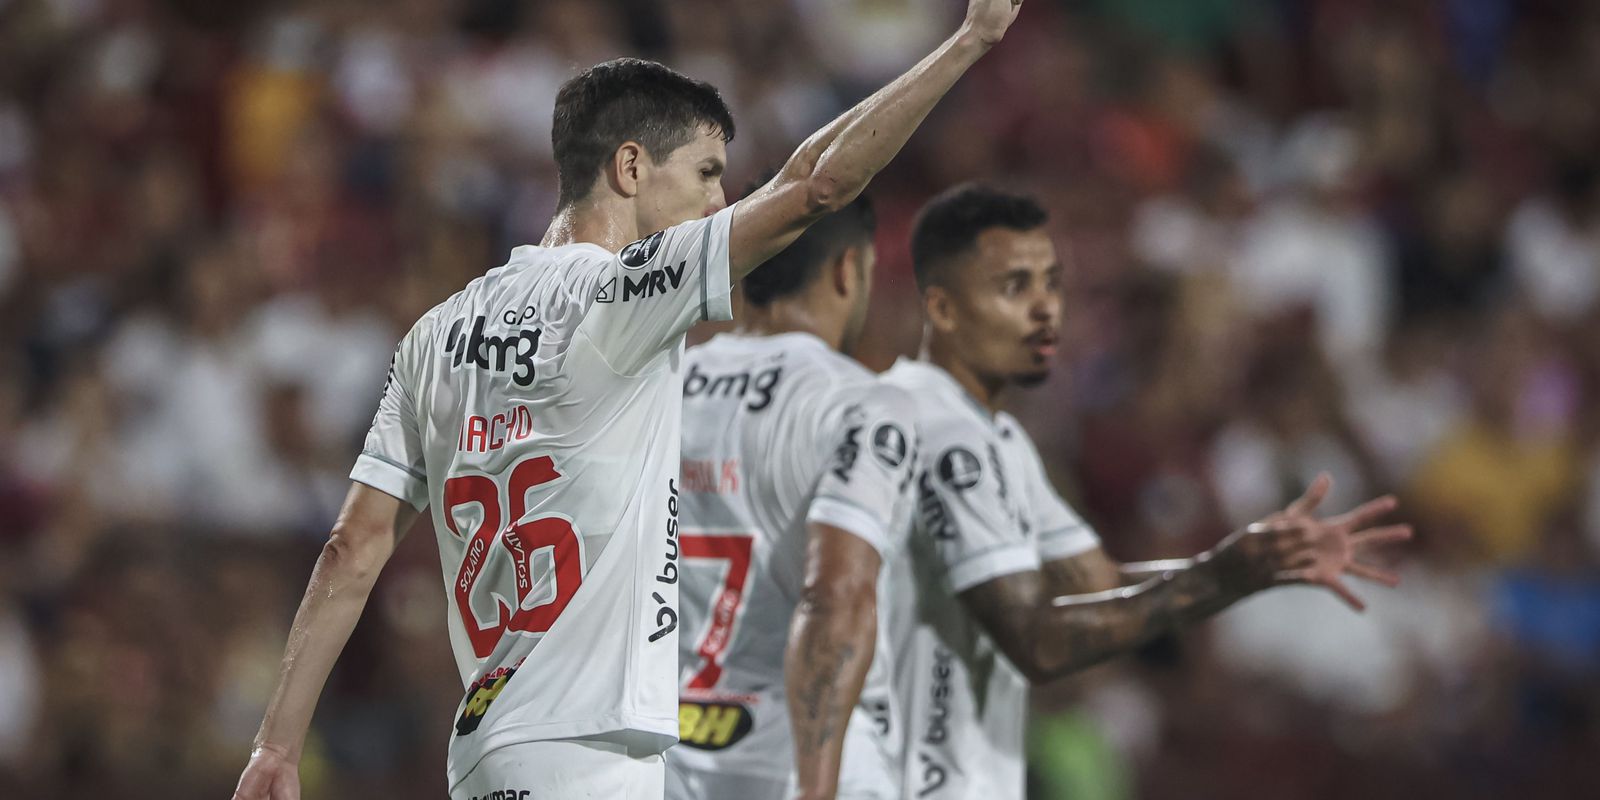 Libertadores: Atlético-MG beat Tolima 2-0 in Colombia